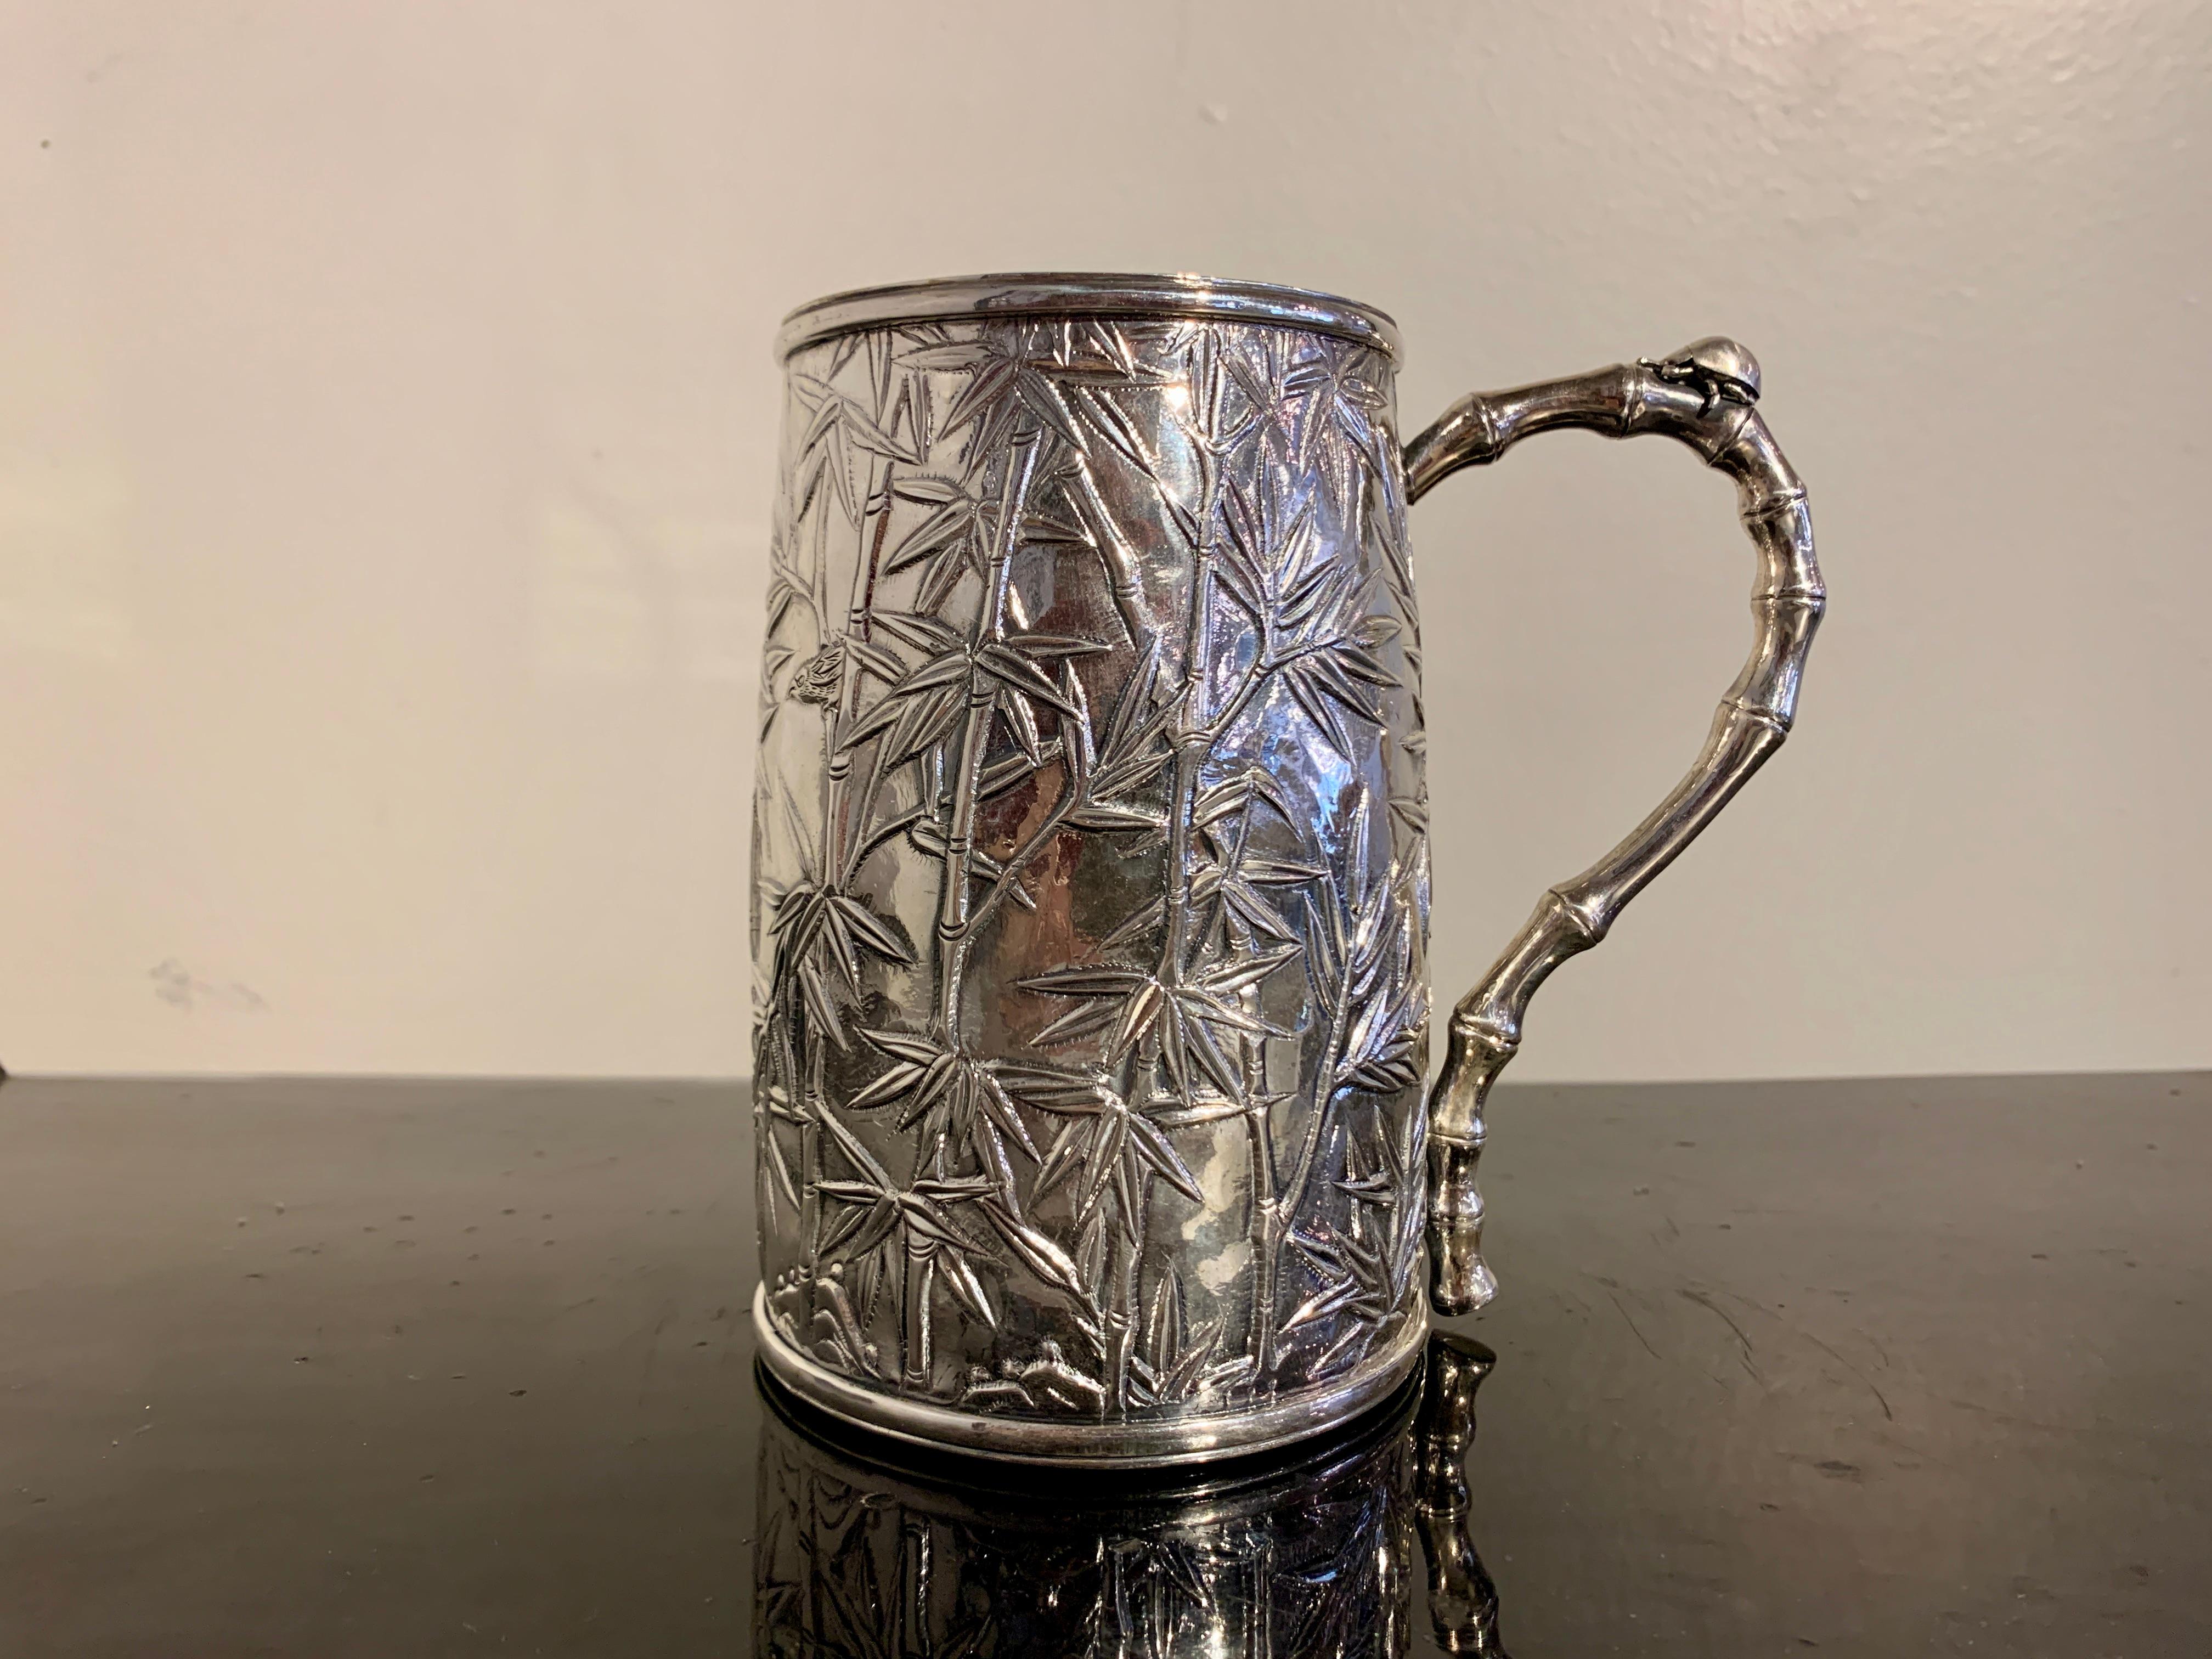 A wonderful Chinese export silver bamboo motif tankard by Luen Hing, circa 1920, Shanghai, China.

The large tankard with a slightly bulging and tapered body. The tankard decorated with a wonderfully organic design of leafy bamboo. Sparrows flit and